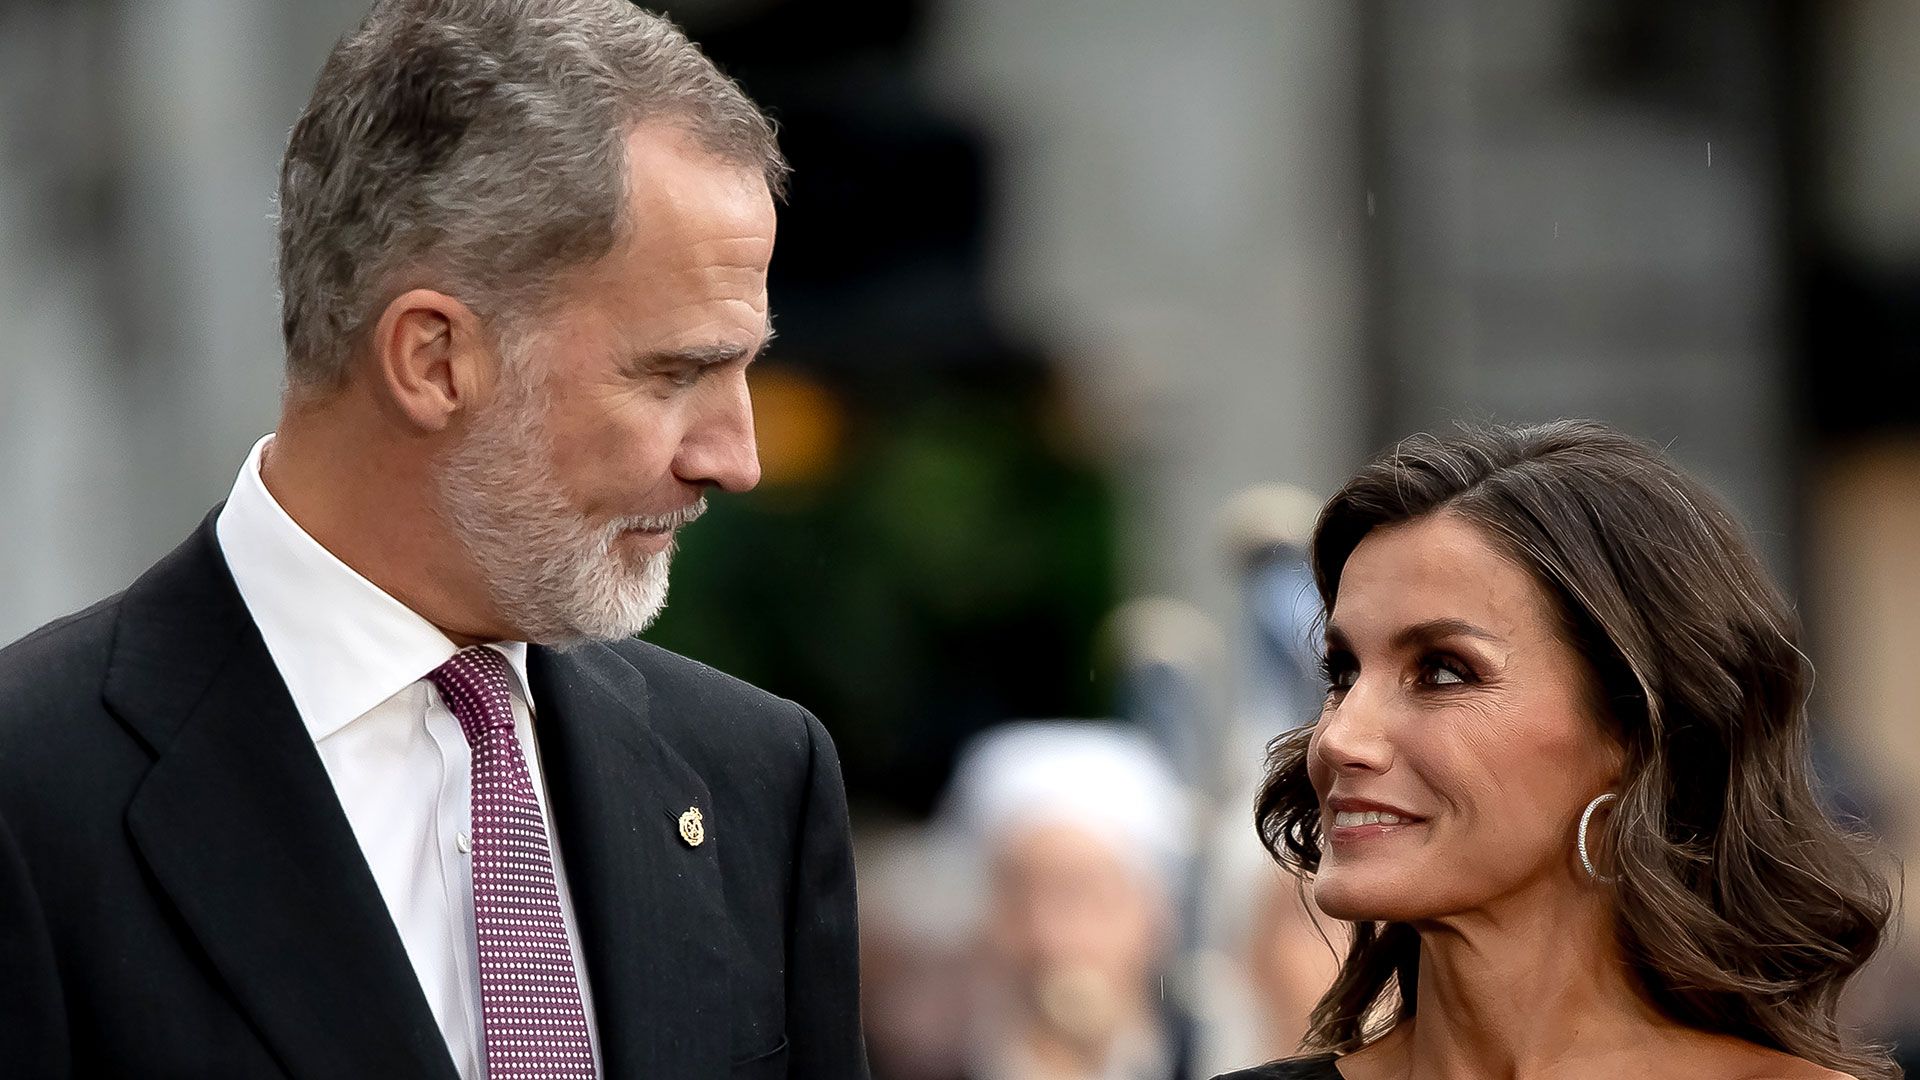 King Felipe and Queen Letizia's sweetest PDA moments as they celebrate anniversary